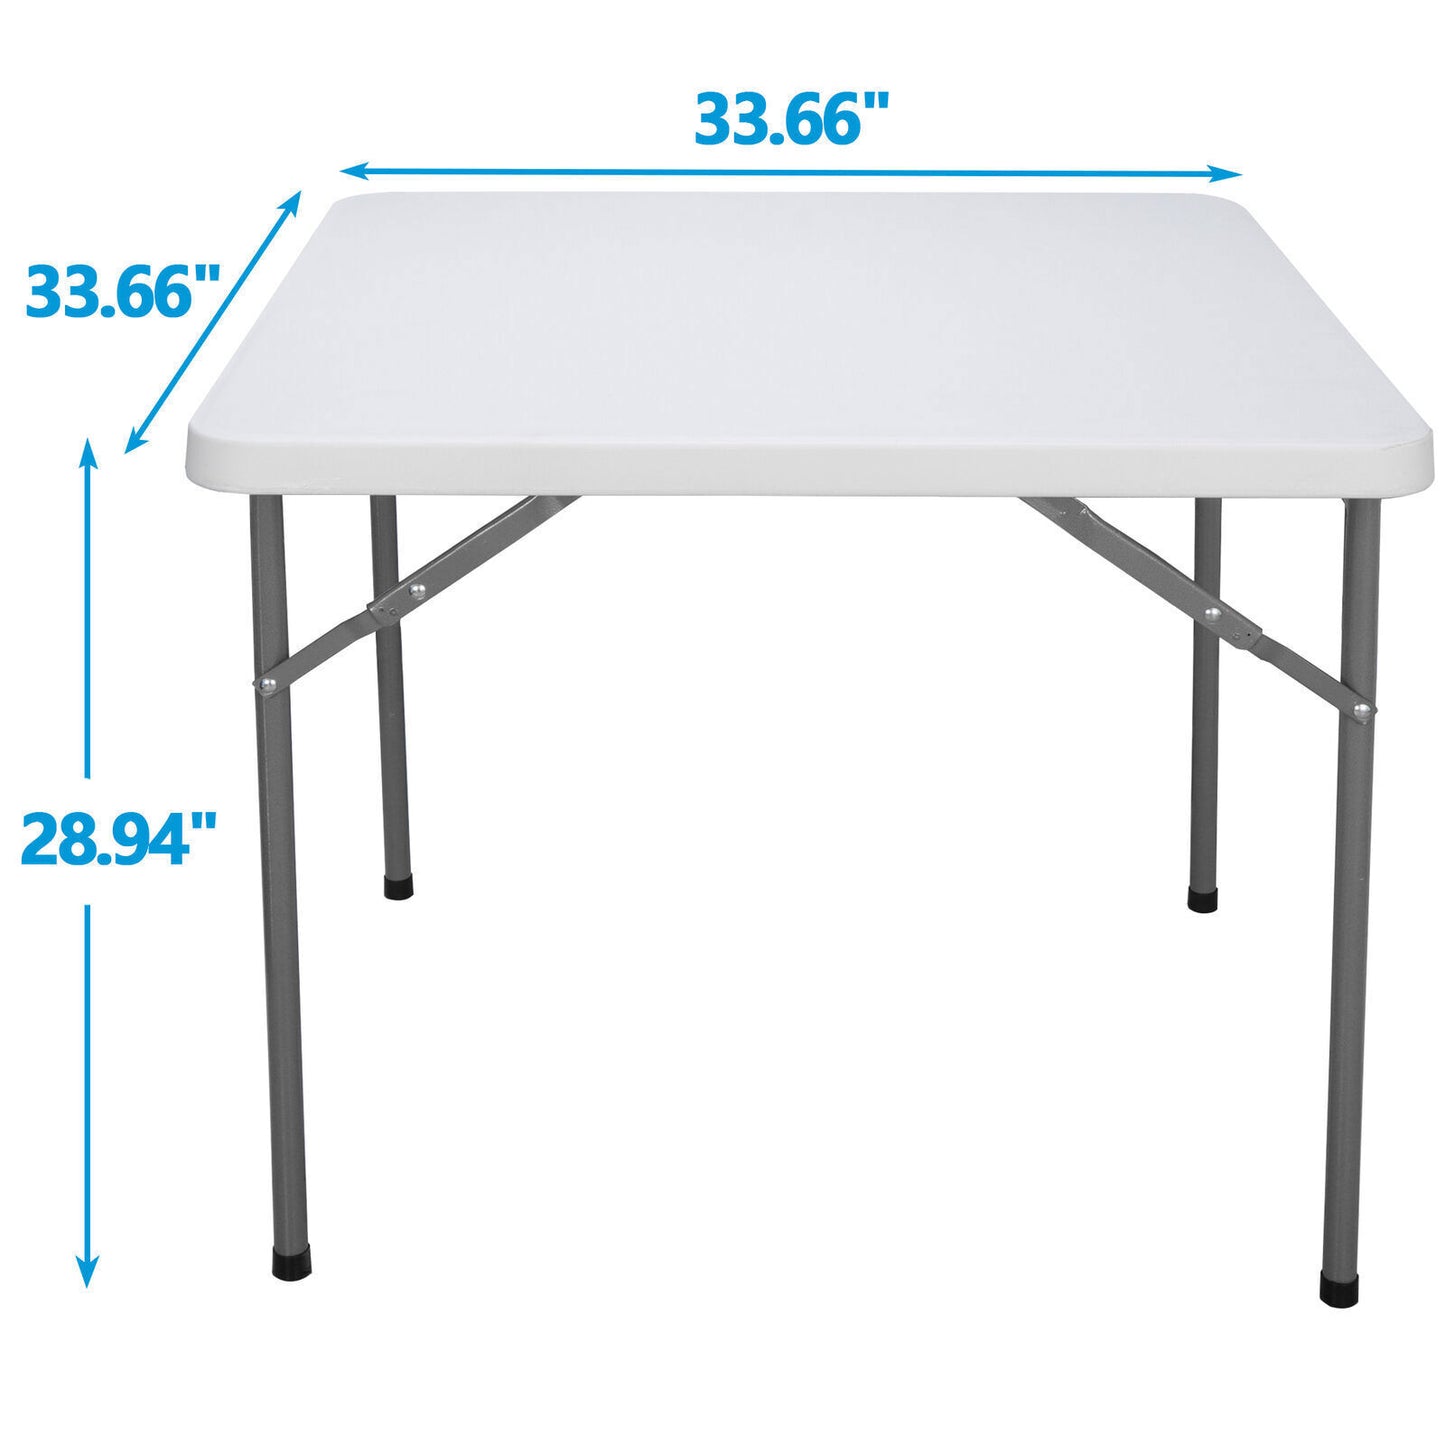 2PCS 3ft Folding Table Portable Indoor Outdoor Picnic Party Camping Tables